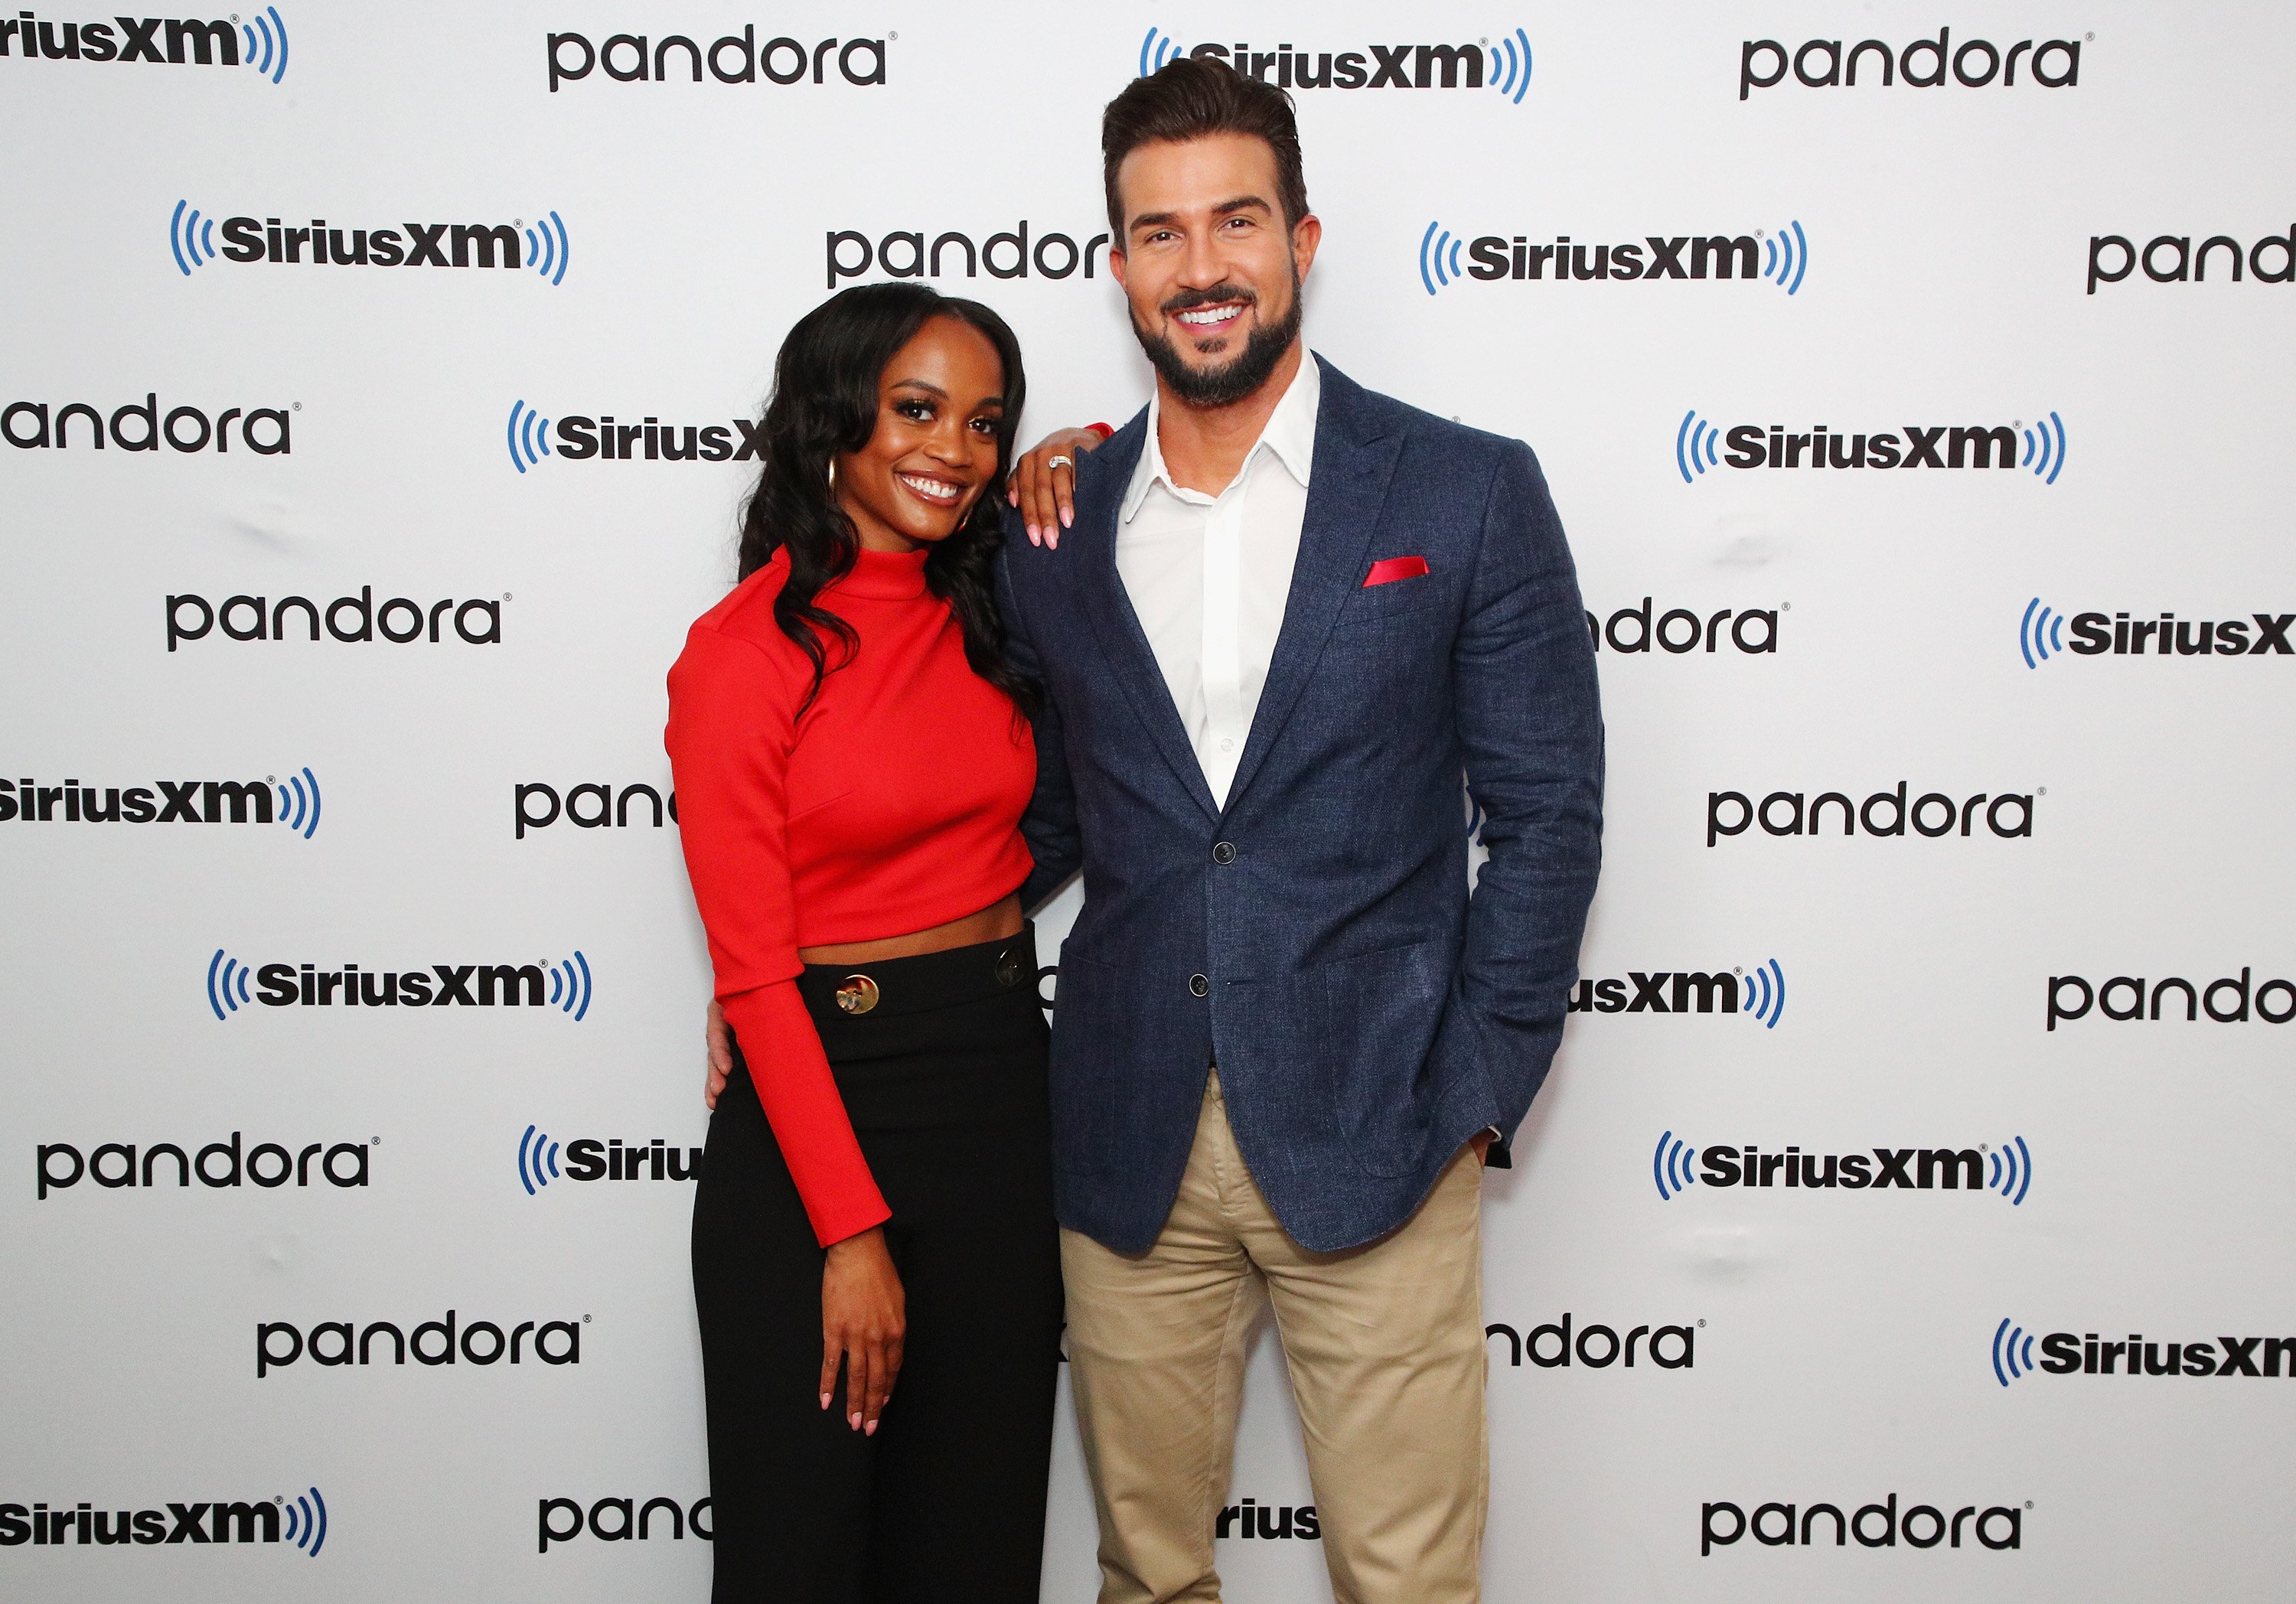 Rachel Lindsay in a red sweater and Bryan Abasolo in a blue suit.